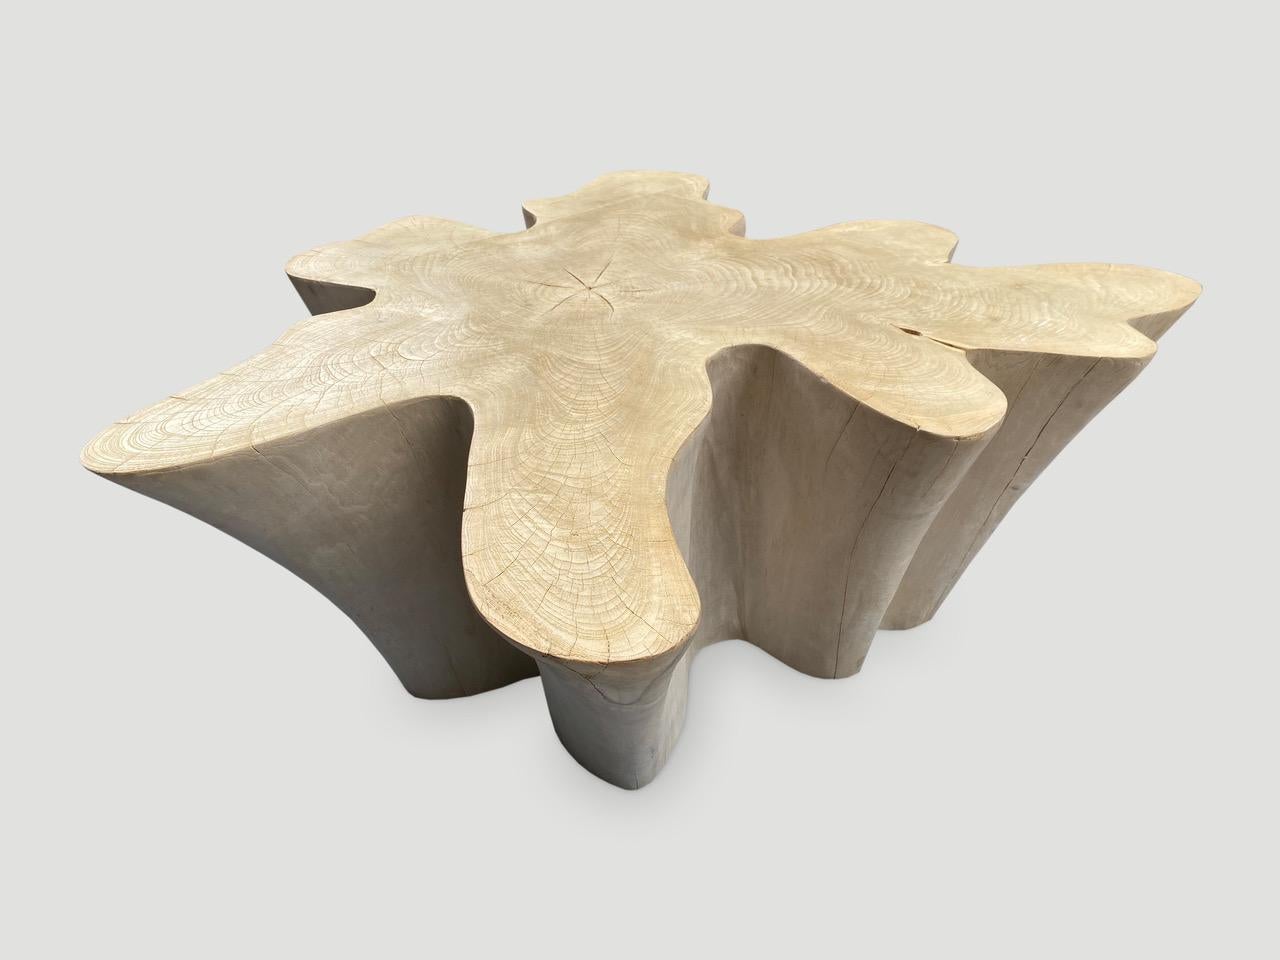 Impressive reclaimed bleached teak amorphous coffee table. A slight graduation from the bottom to the top. 

The St. Barts Collection features an exciting new line of organic white wash, bleached and natural weathered teak furniture. The reclaimed